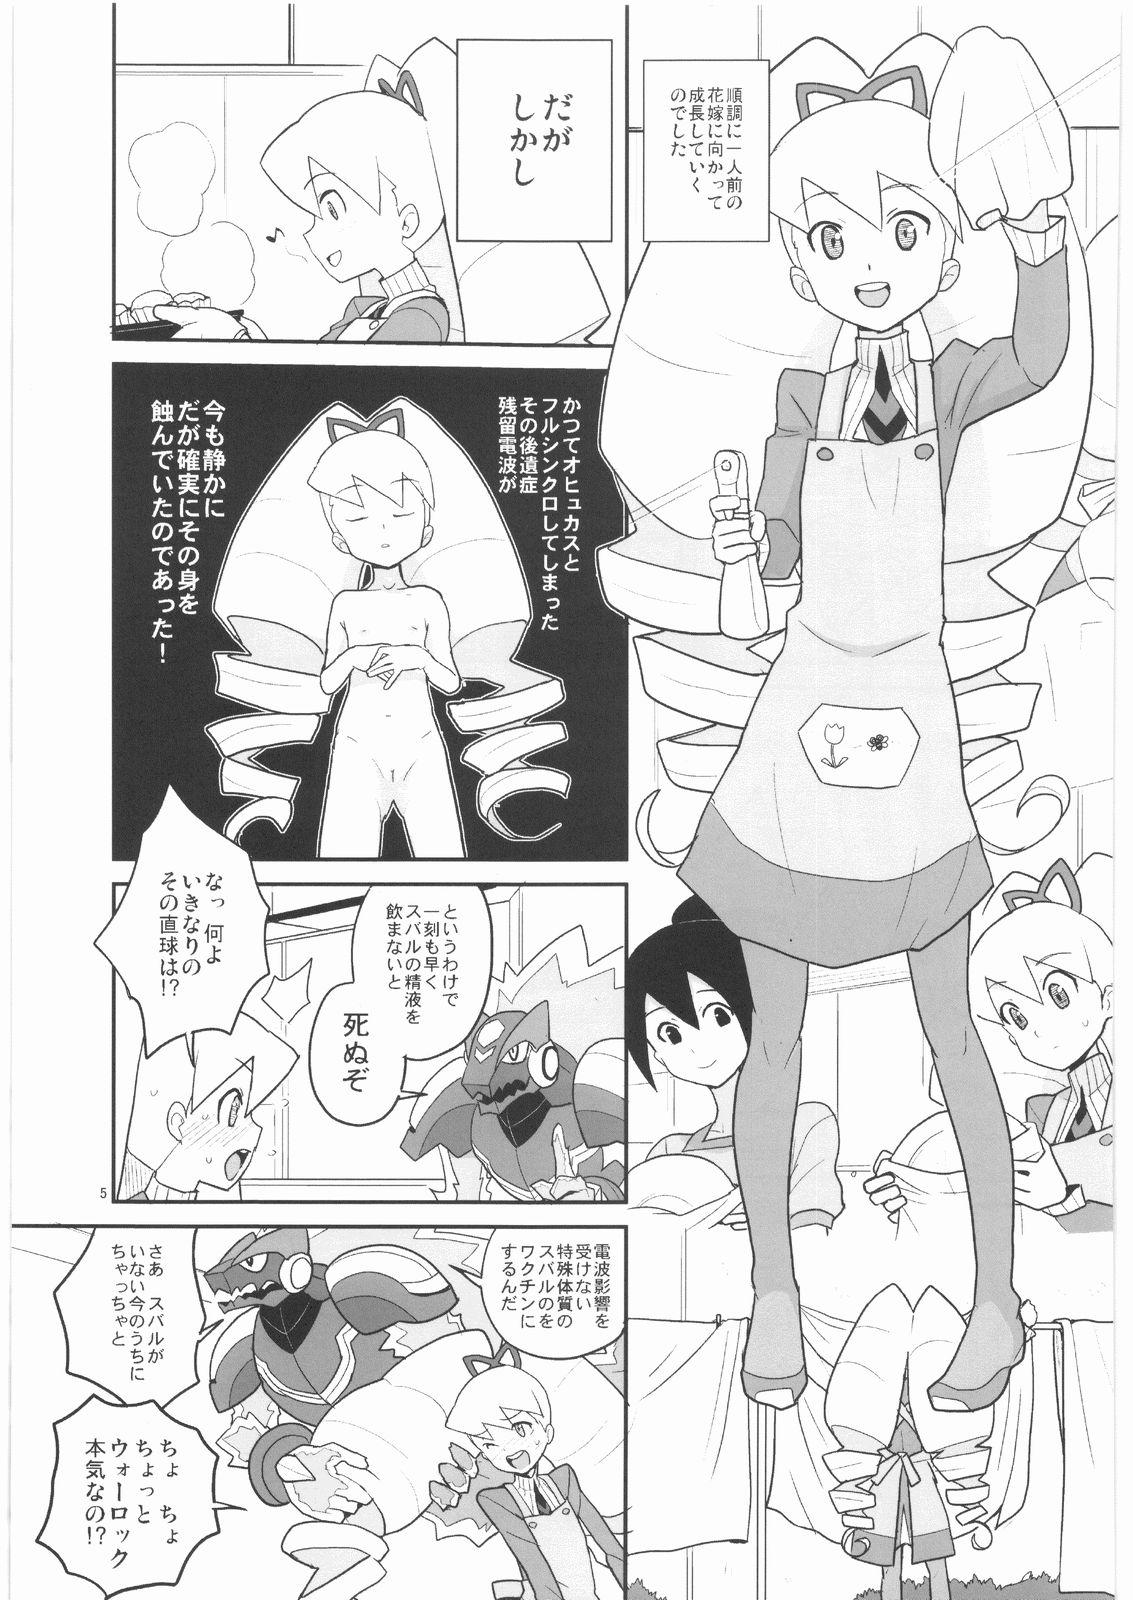 Pussy Fingering Drill to Tights to Iinchou! - Megaman Mega man star force Breast - Page 4